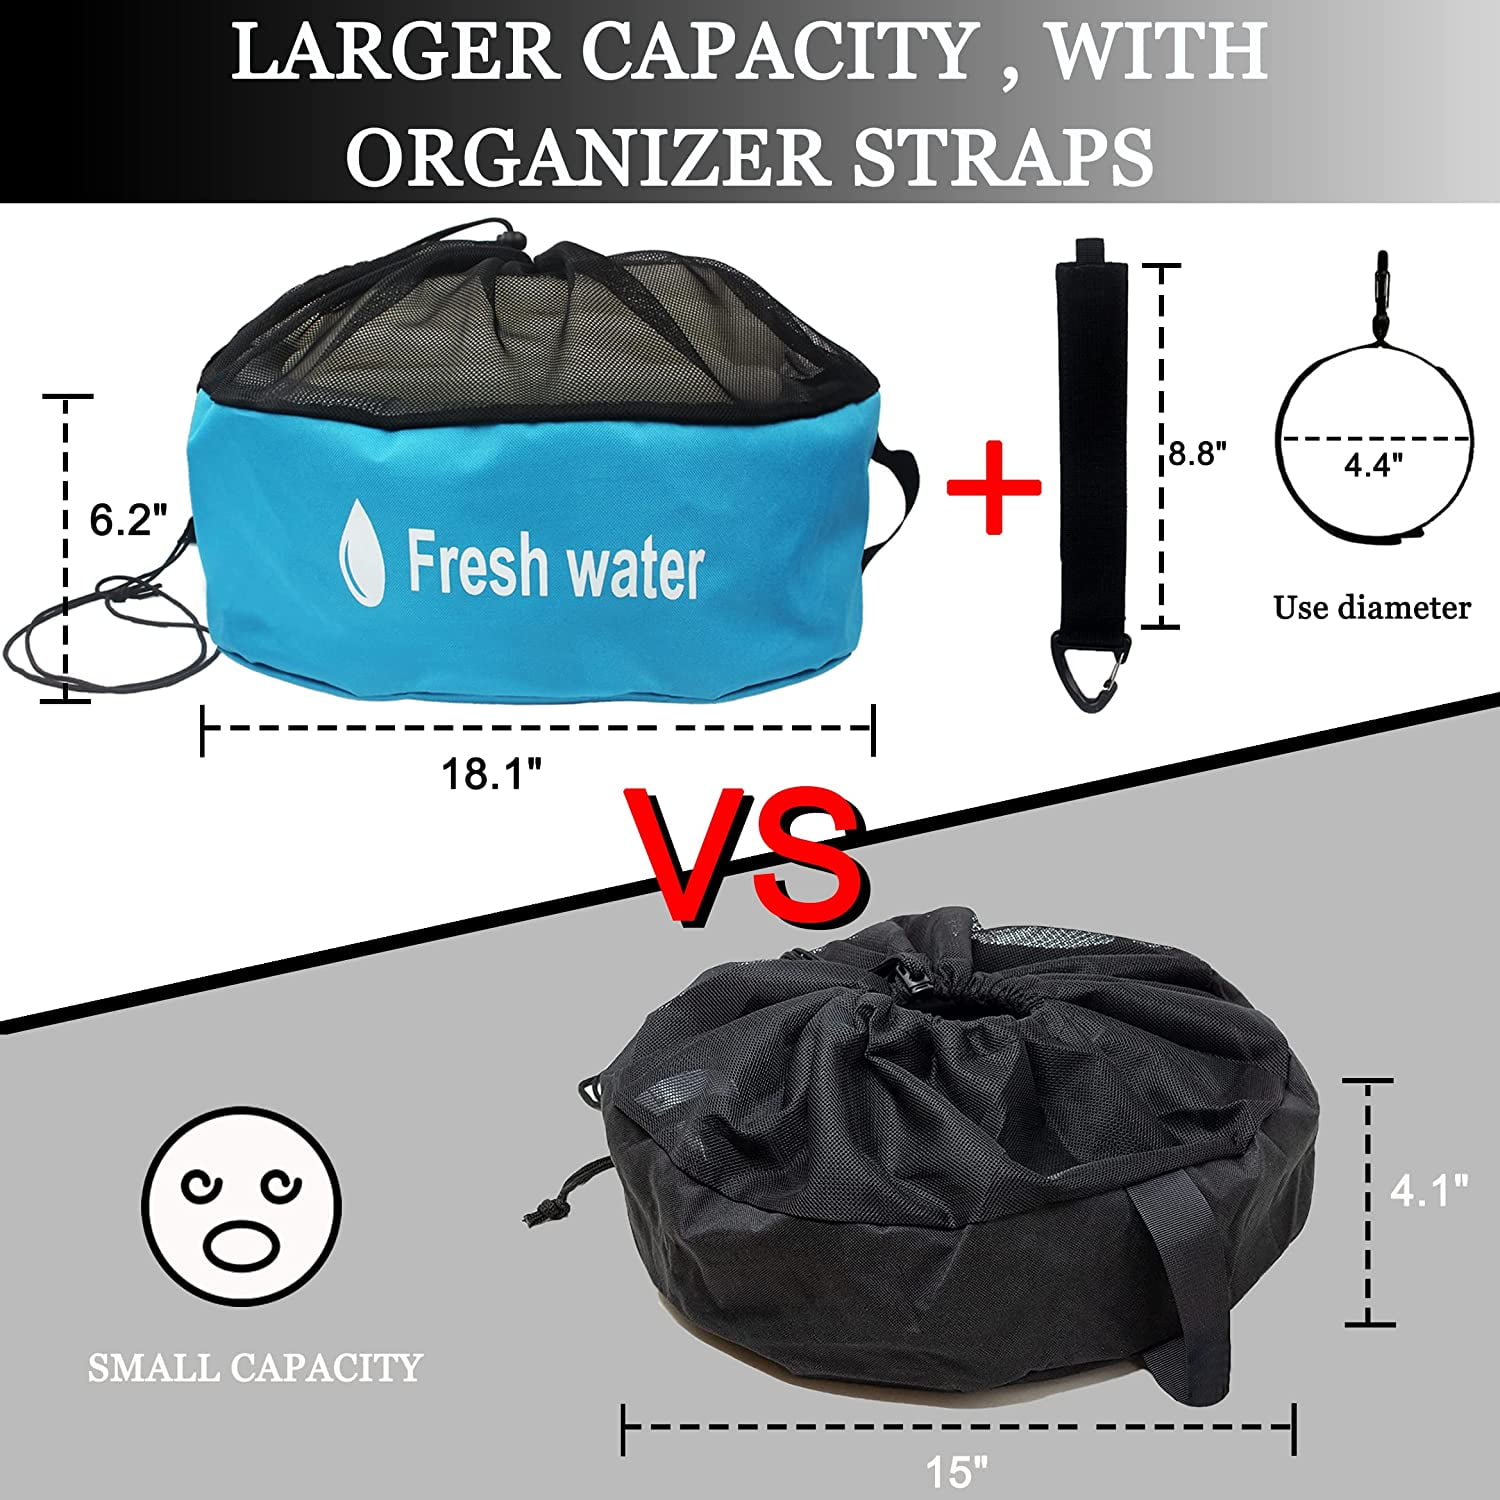 Skywee Waterproof RV Hose Storage Bag, RV Utility Bag, Sewer Hose Bag, RV  Accessories Bag for Storing Your Water Hose, Black Hose, Electrical,  Include 4 Straps and 4 Hooks 